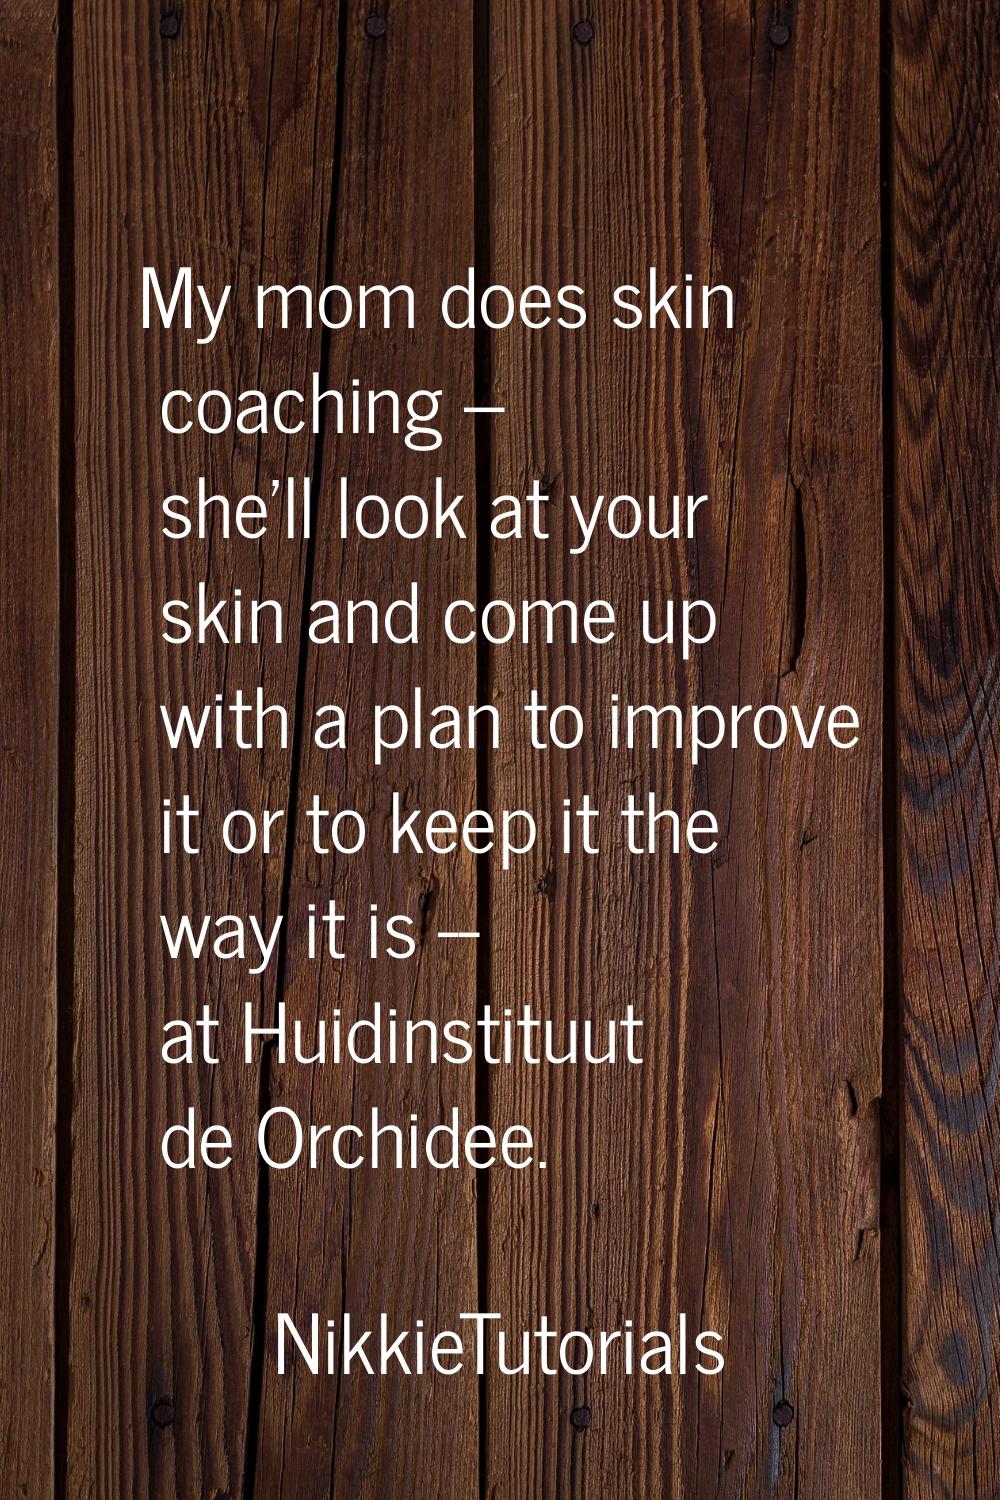 My mom does skin coaching -- she'll look at your skin and come up with a plan to improve it or to k